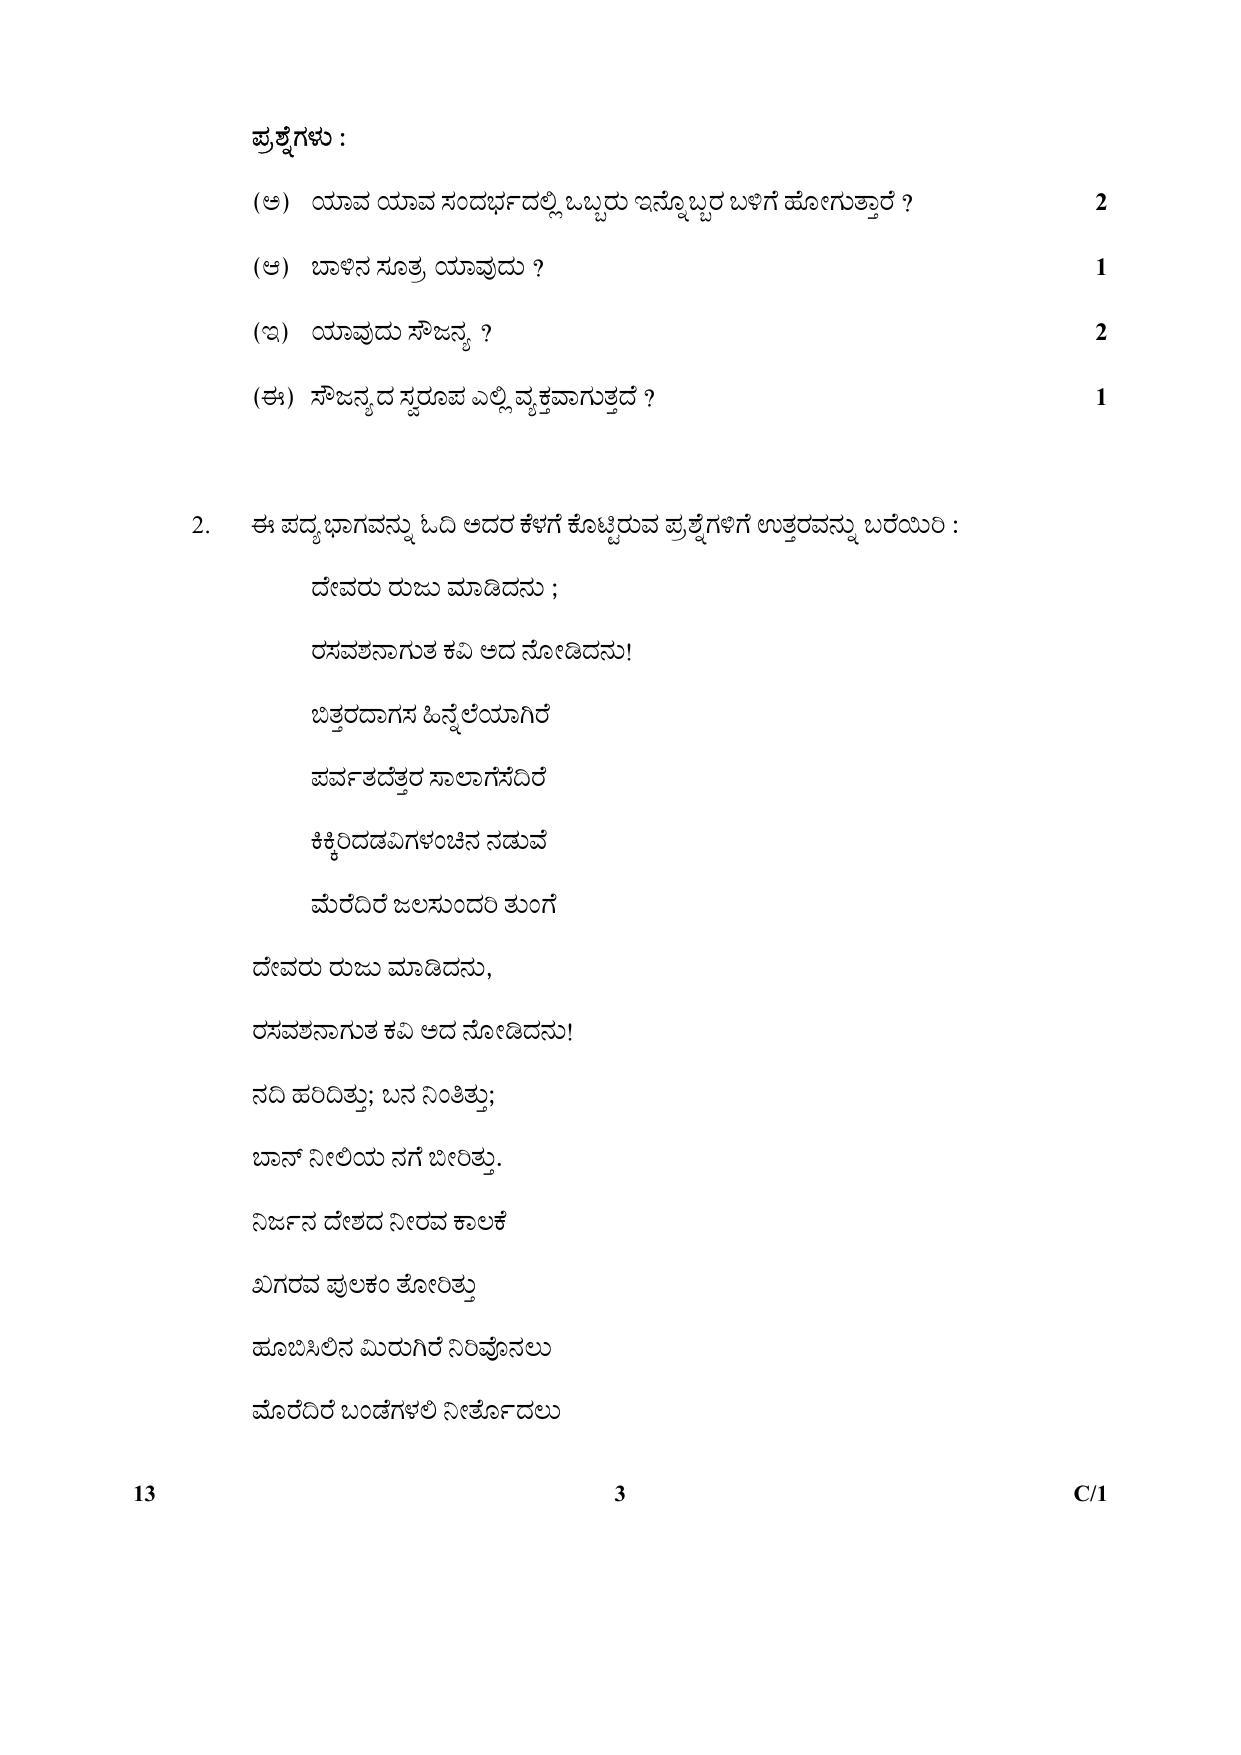 CBSE Class 10 13 (Kannada) 2018 Compartment Question Paper - Page 3